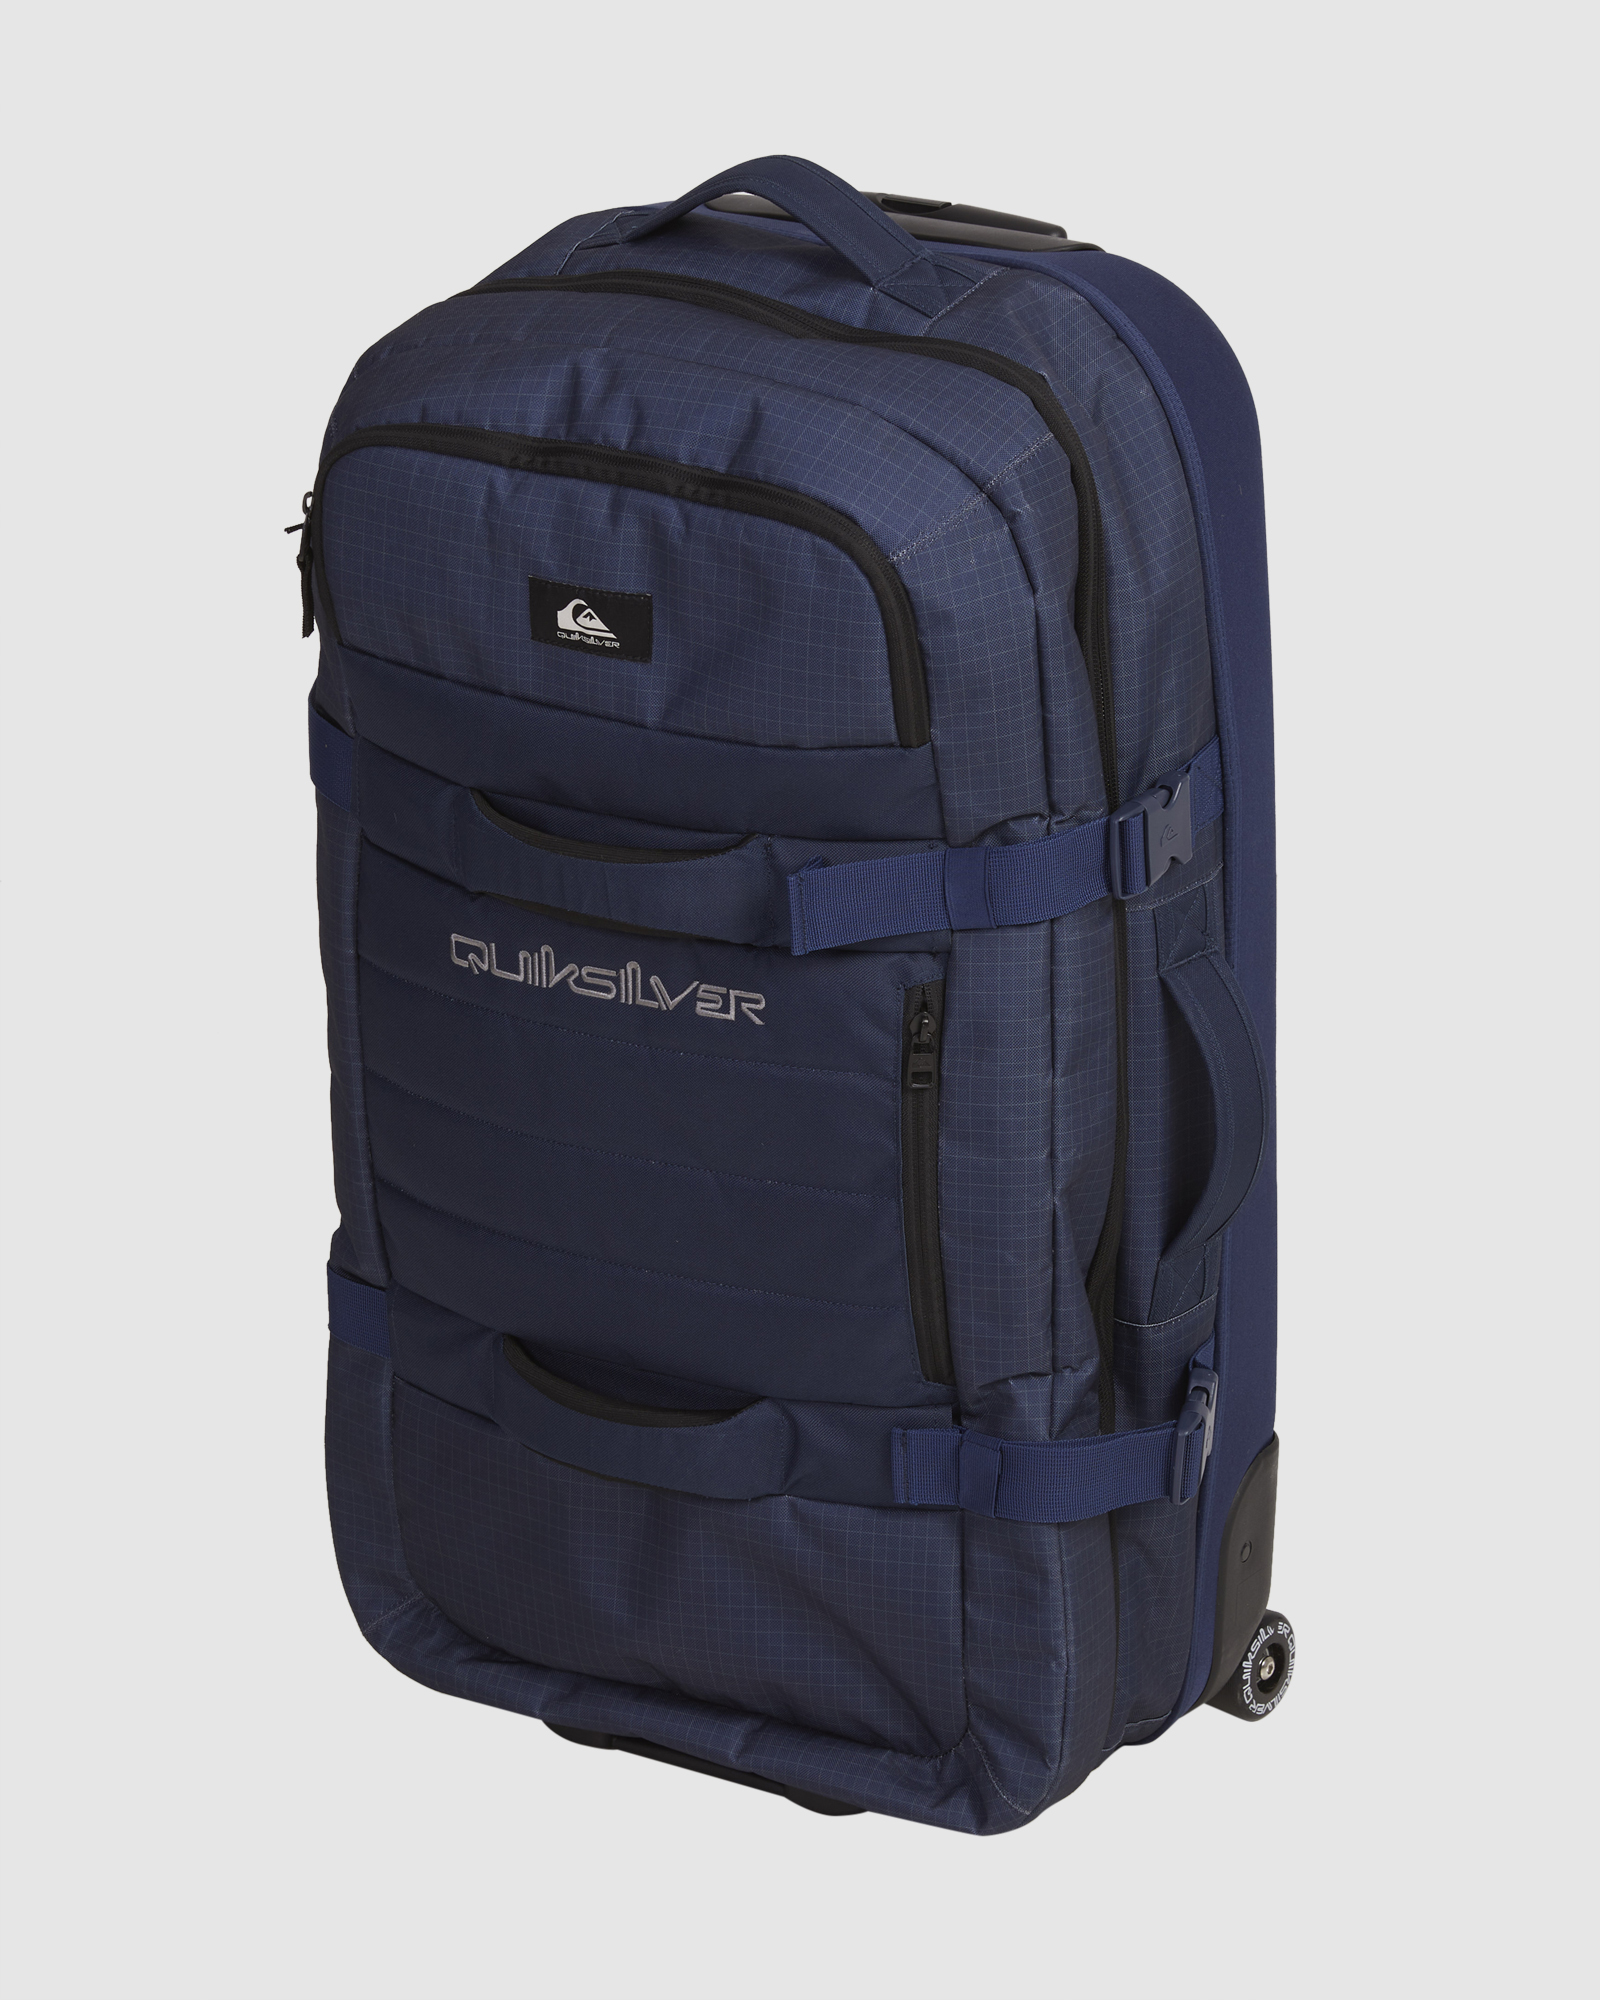 Reach Academy Naval Wheeled 100L SurfStitch | New Large - Quiksilver Suitcase